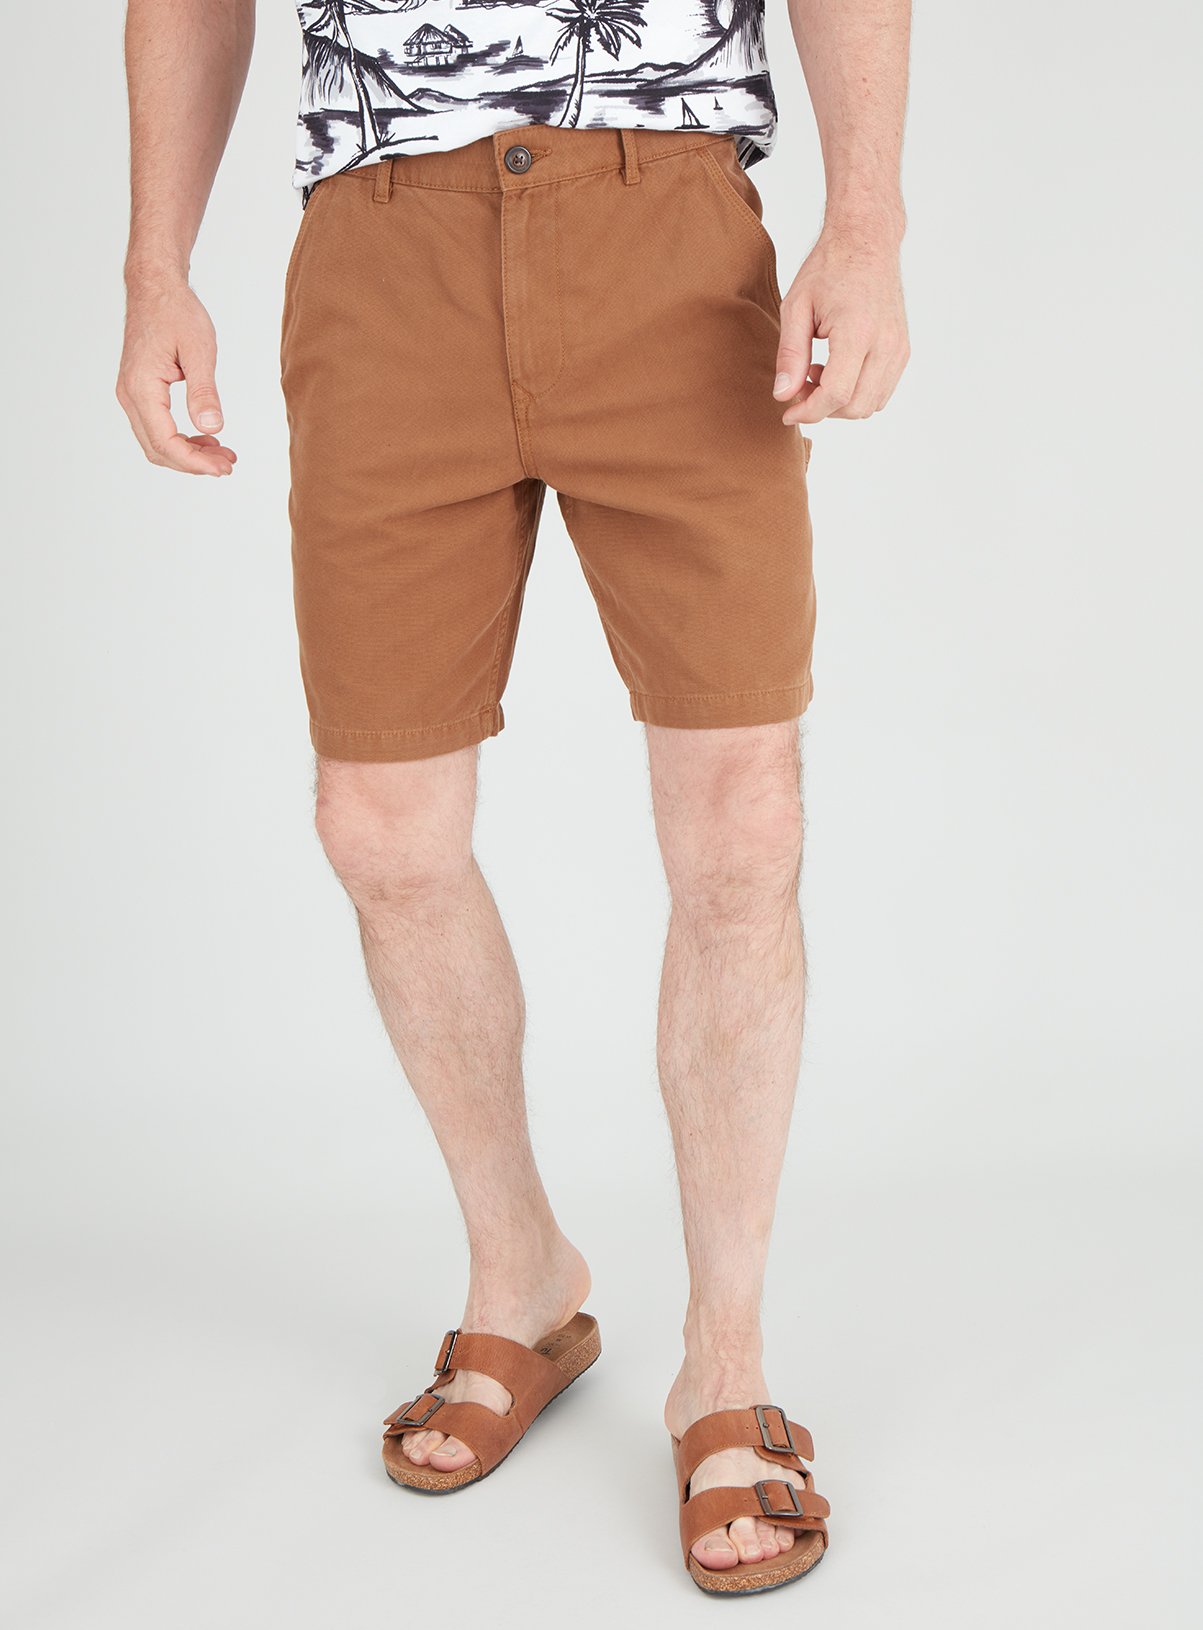 Tobacco Brown Carpenter Shorts Review